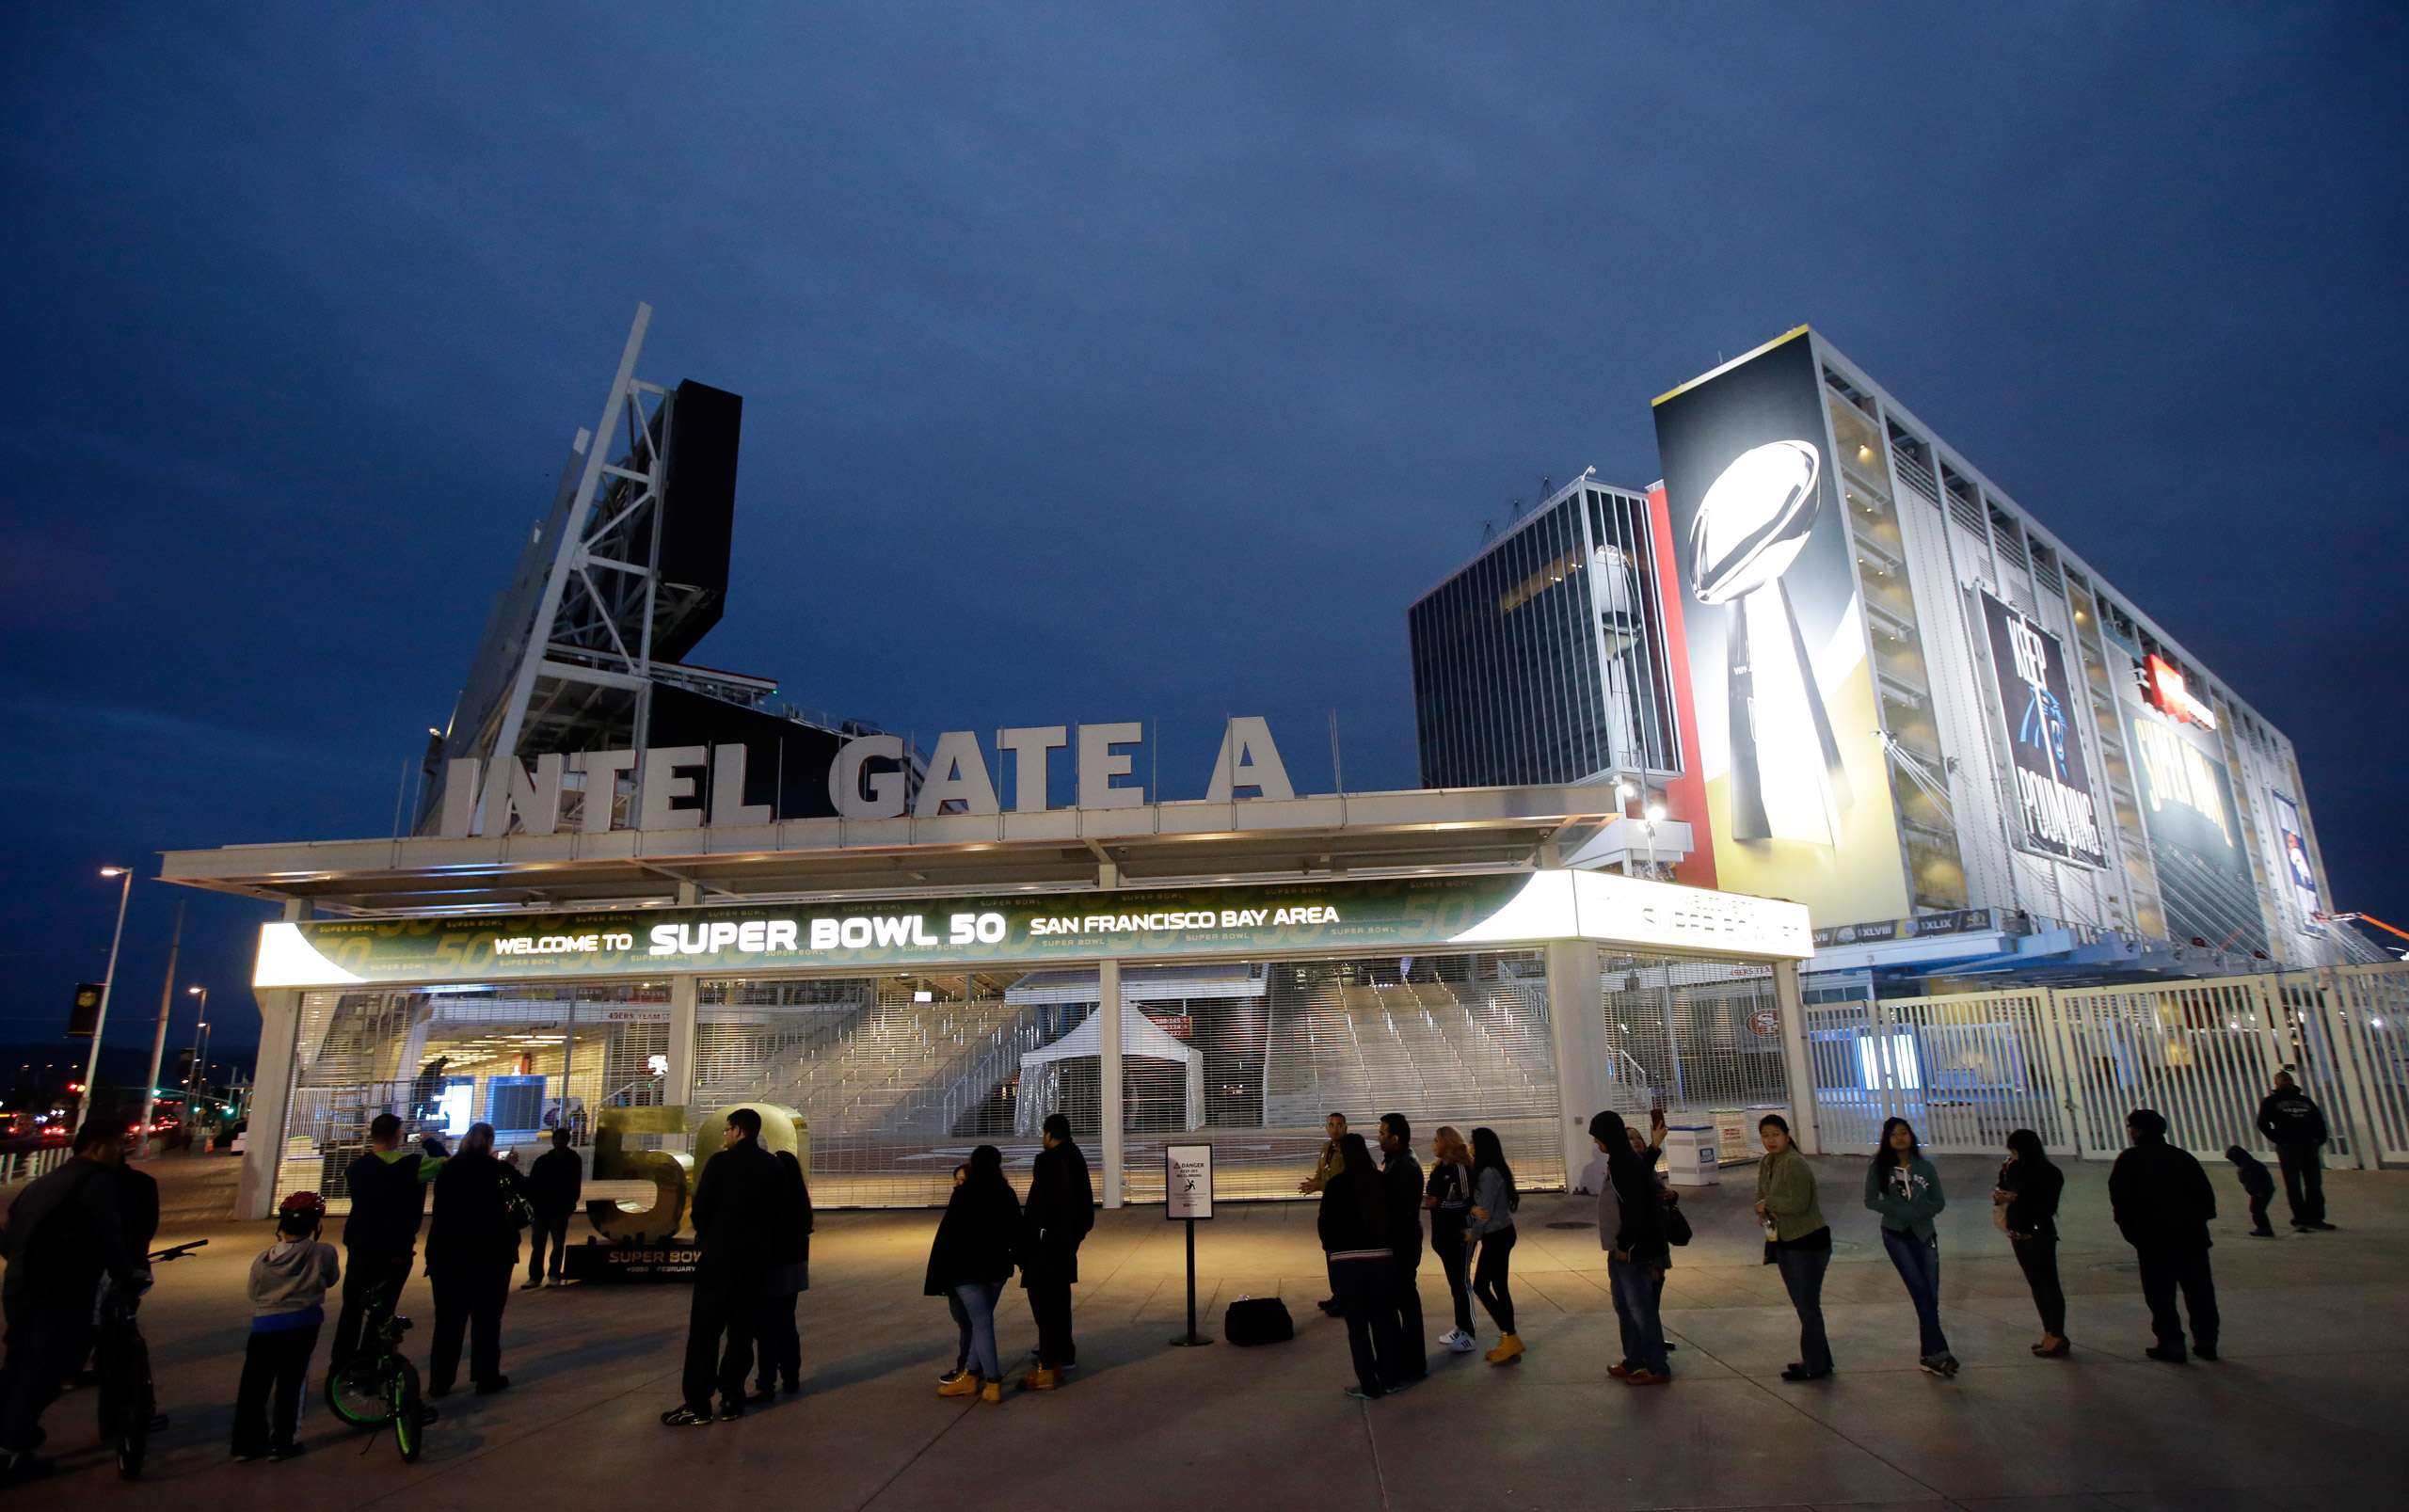 Visitors line up to pose for photos outside of Levi's Stadium Saturday, Jan. 30, 2016, in Santa Clara, Calif. Super Bowl 50, between the Carolina Panthers and Denver Broncos, will be played at Levi's Stadium Feb. 7.  (AP Photo/Marcio Jose Sanchez)